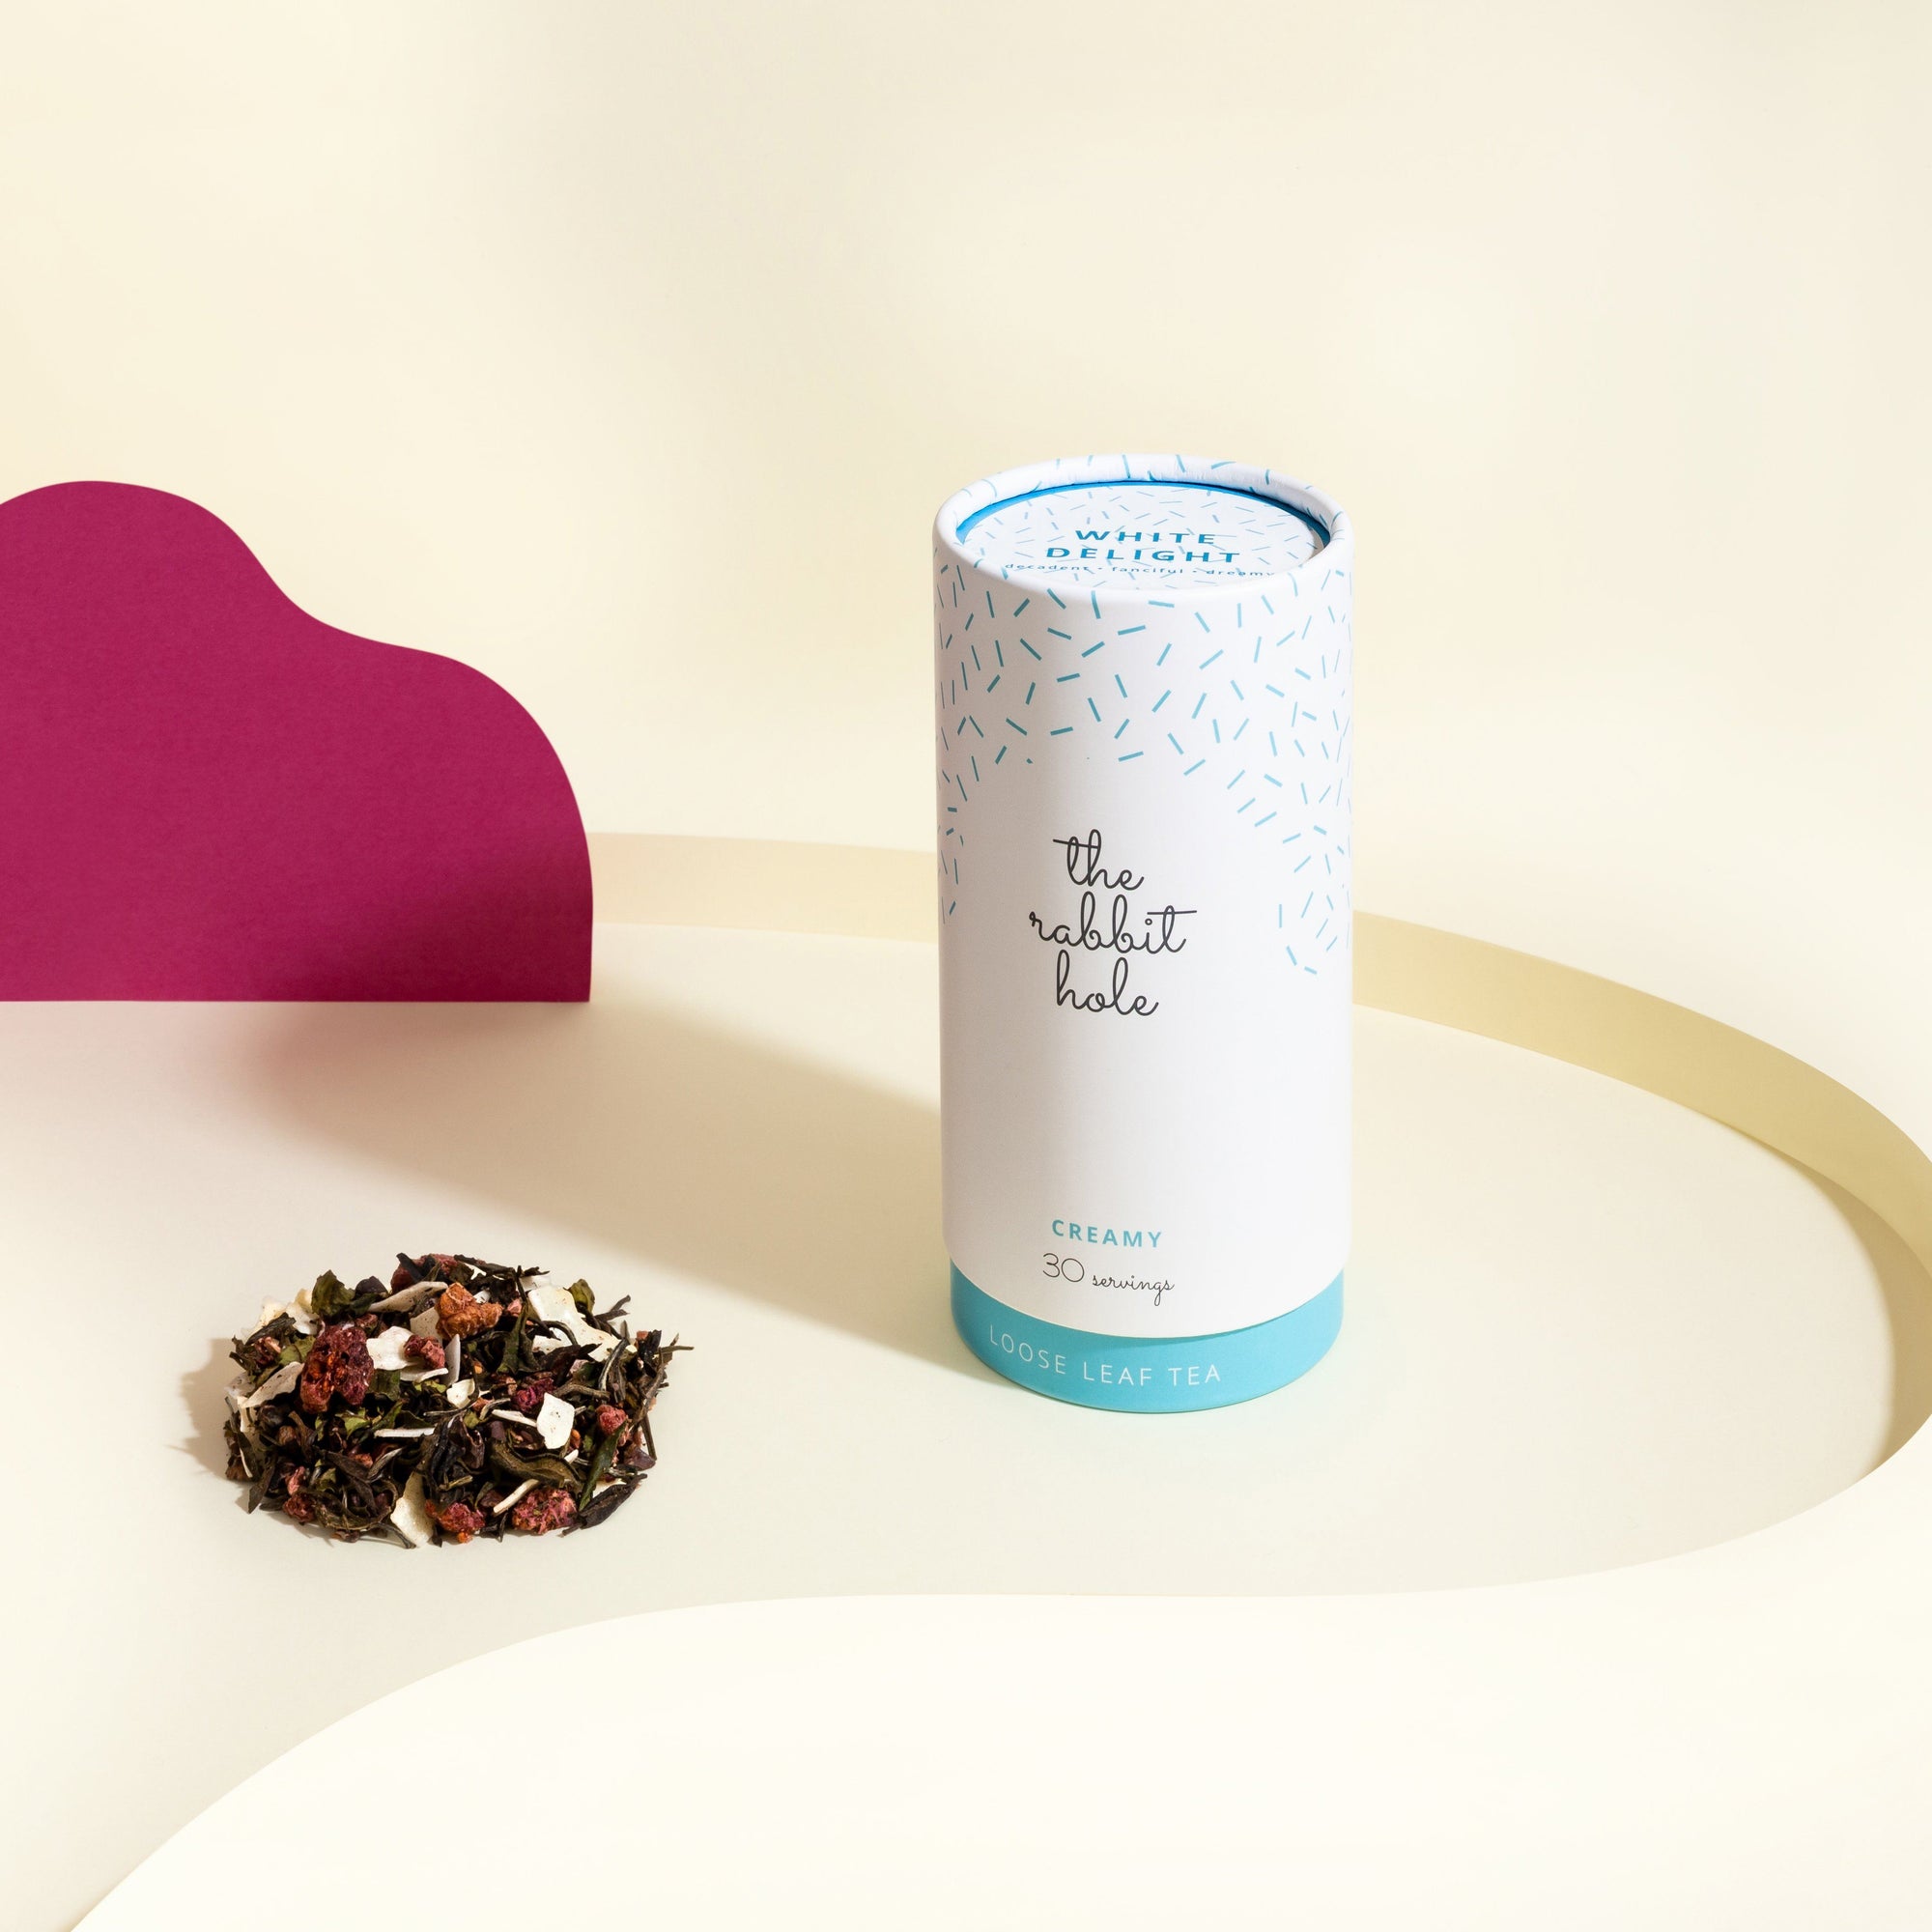 White Delight Canister Creamy loose leaf tea by The Rabbit Hole - Australian Made Tea - pink and pale yellow background